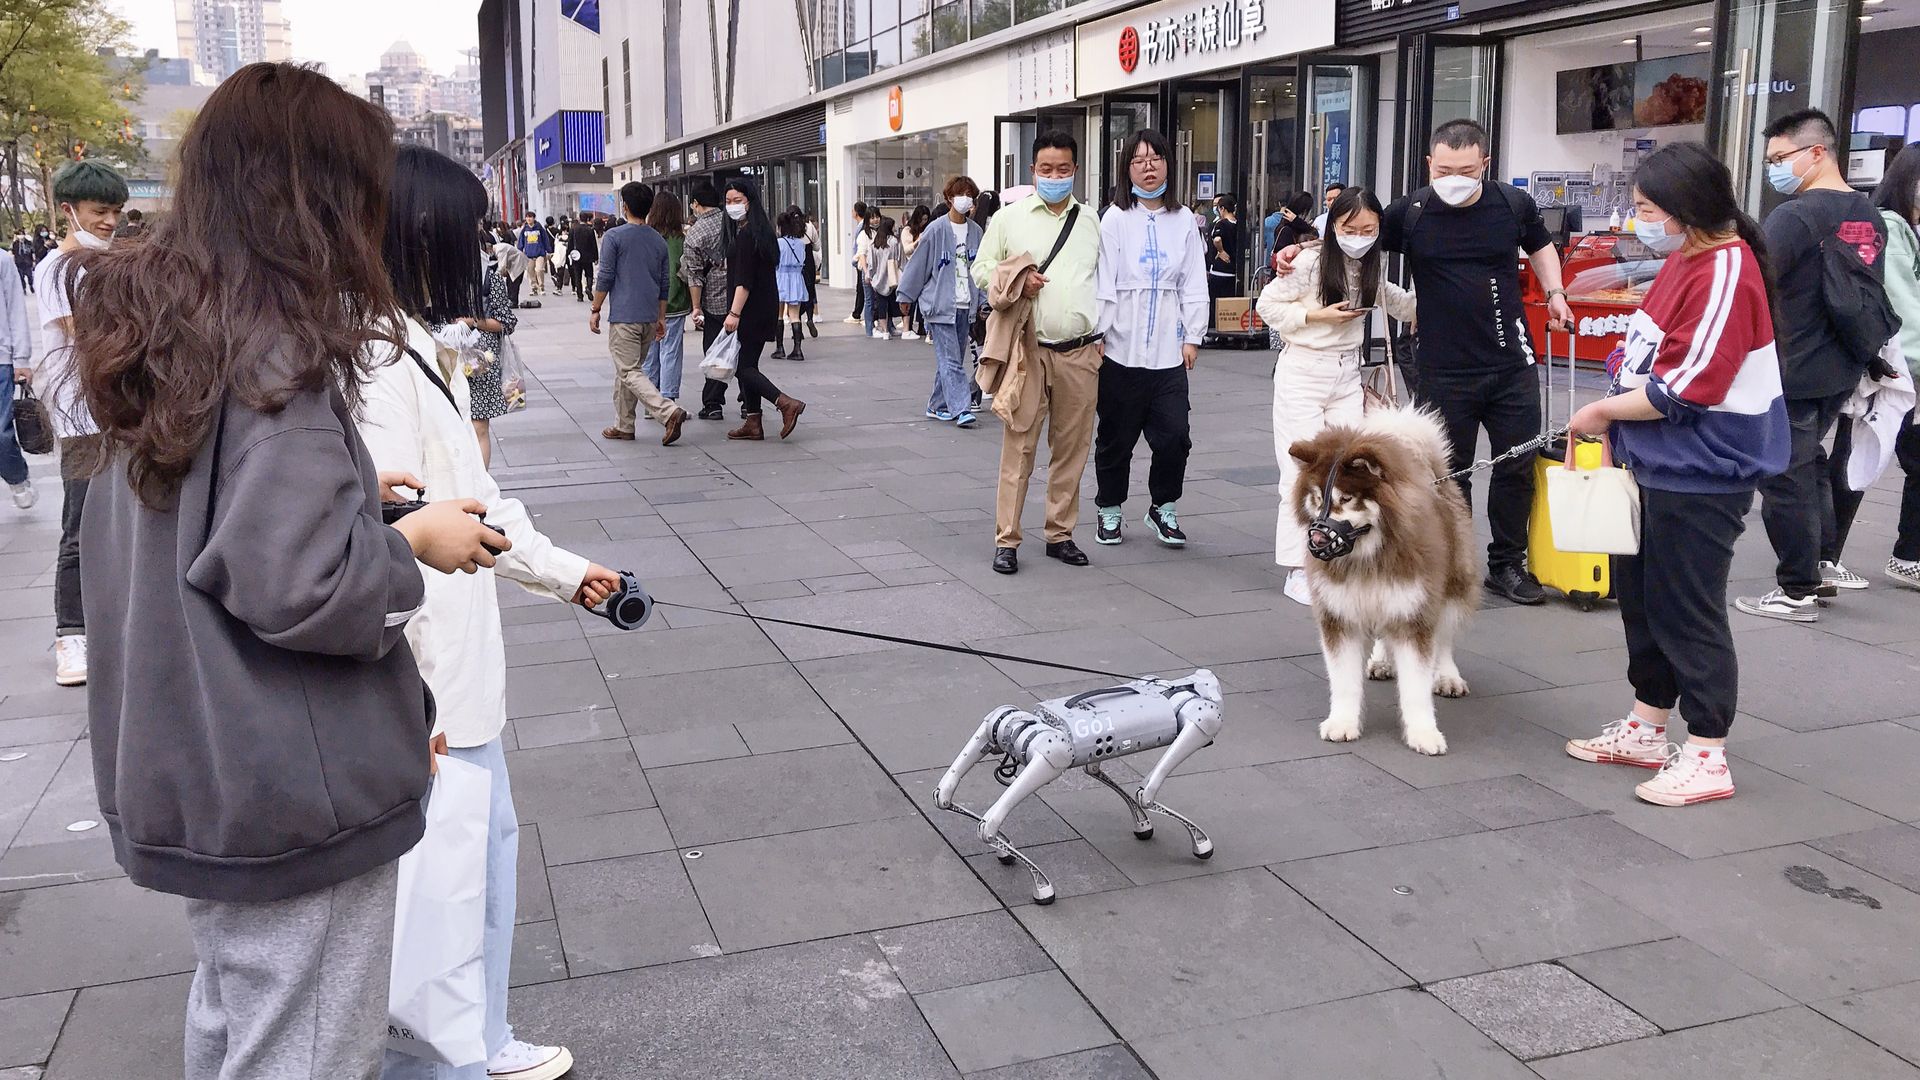 A robotic dog meets a real one on the sidewalk.